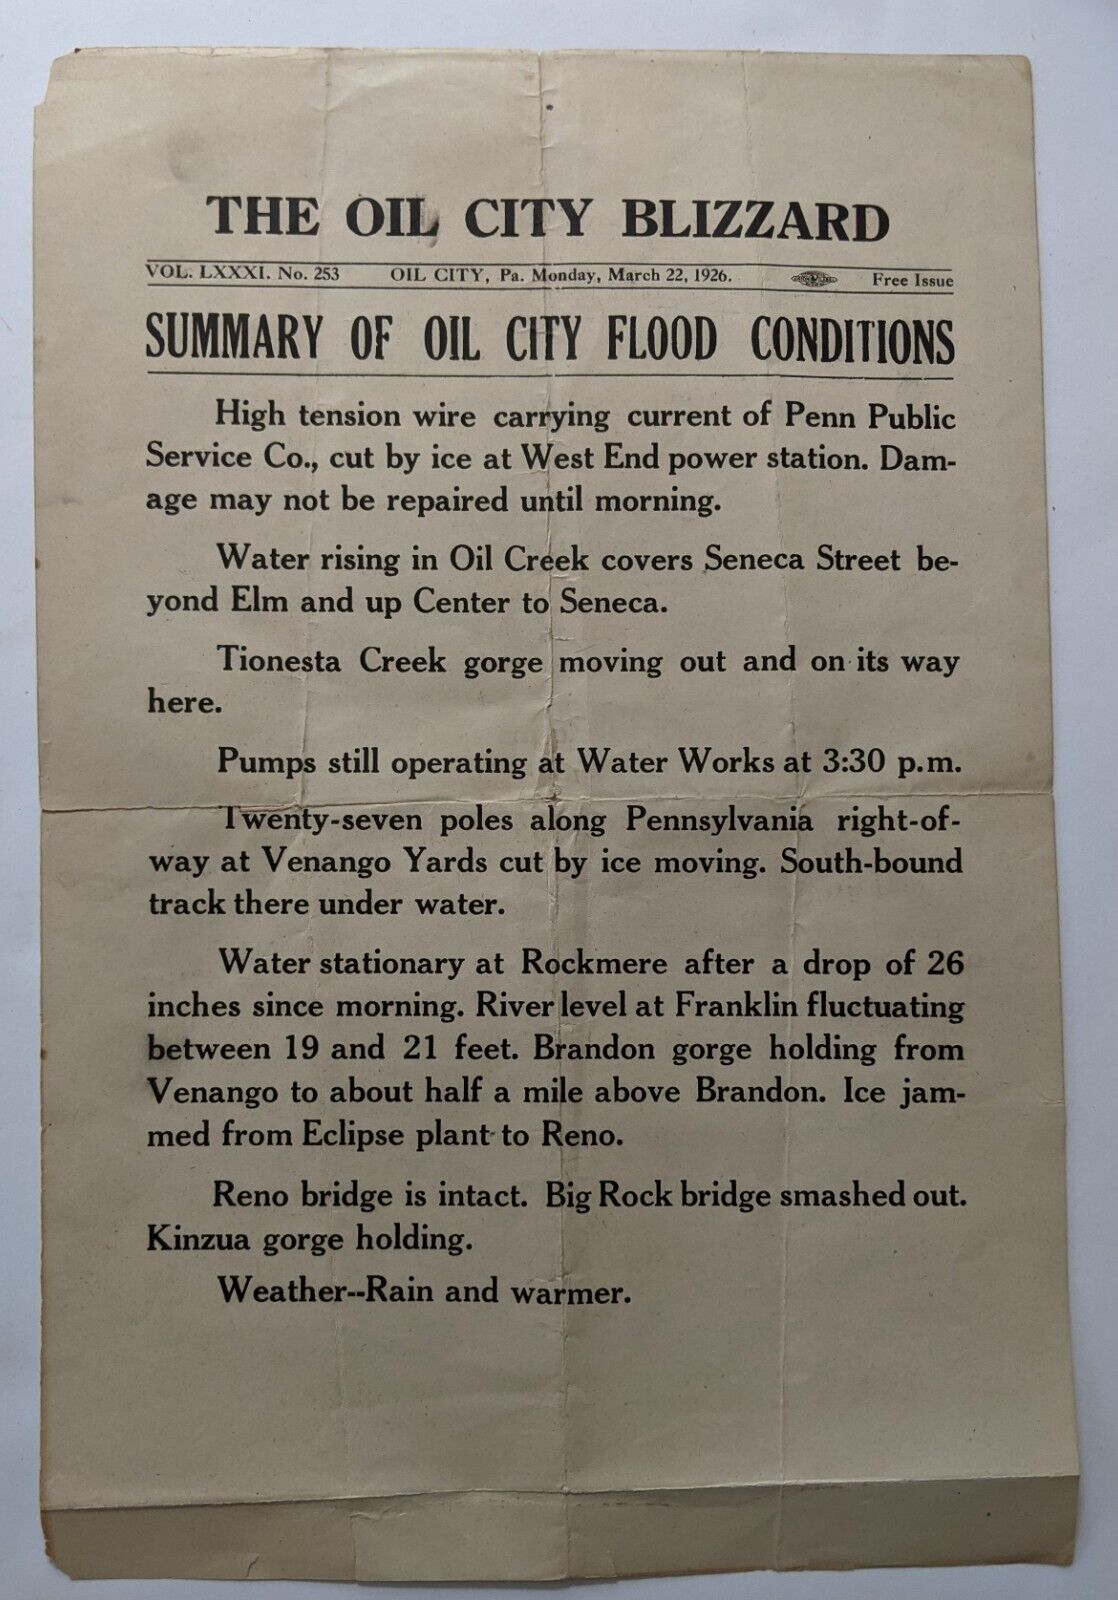 1926 NEWS BROADSIDE The Oil City Blizzard SUMMARY OF OIL CITY FLOOD CONDITION PA